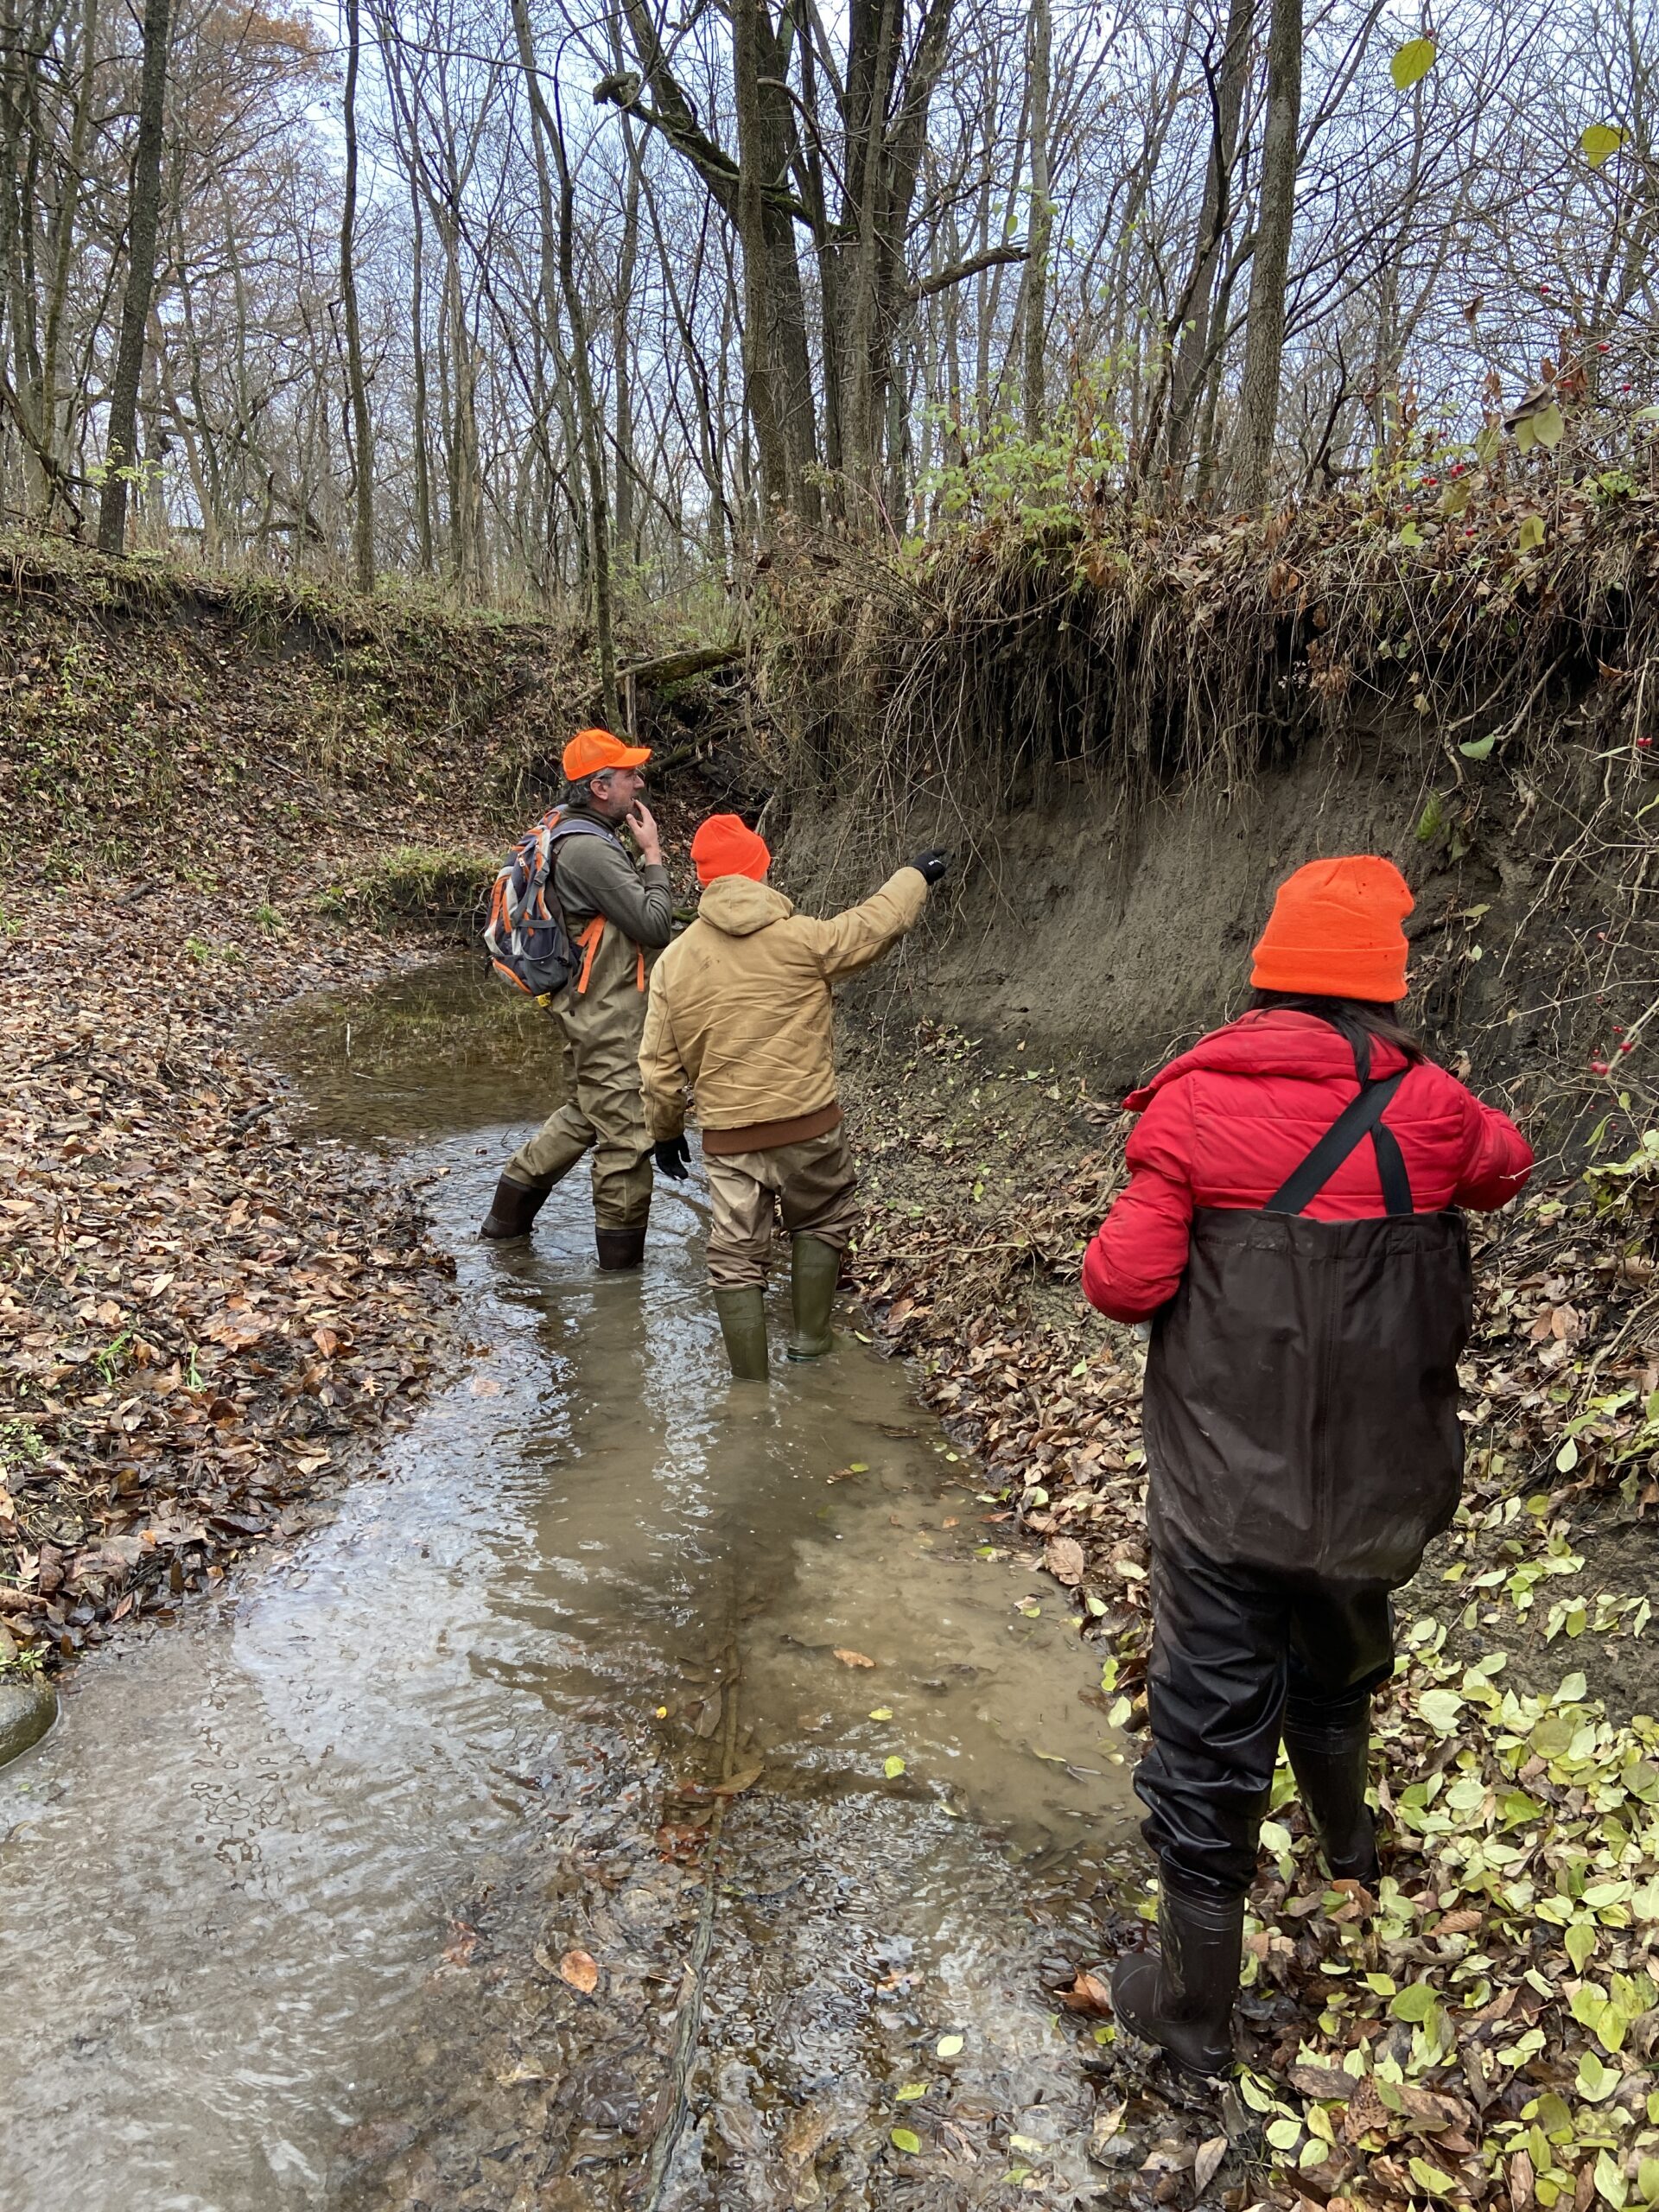 Data was collected by Nothwater Consulting and researchers from the University of Illinois during stream walks in Polecat Creek and it's tributaries.